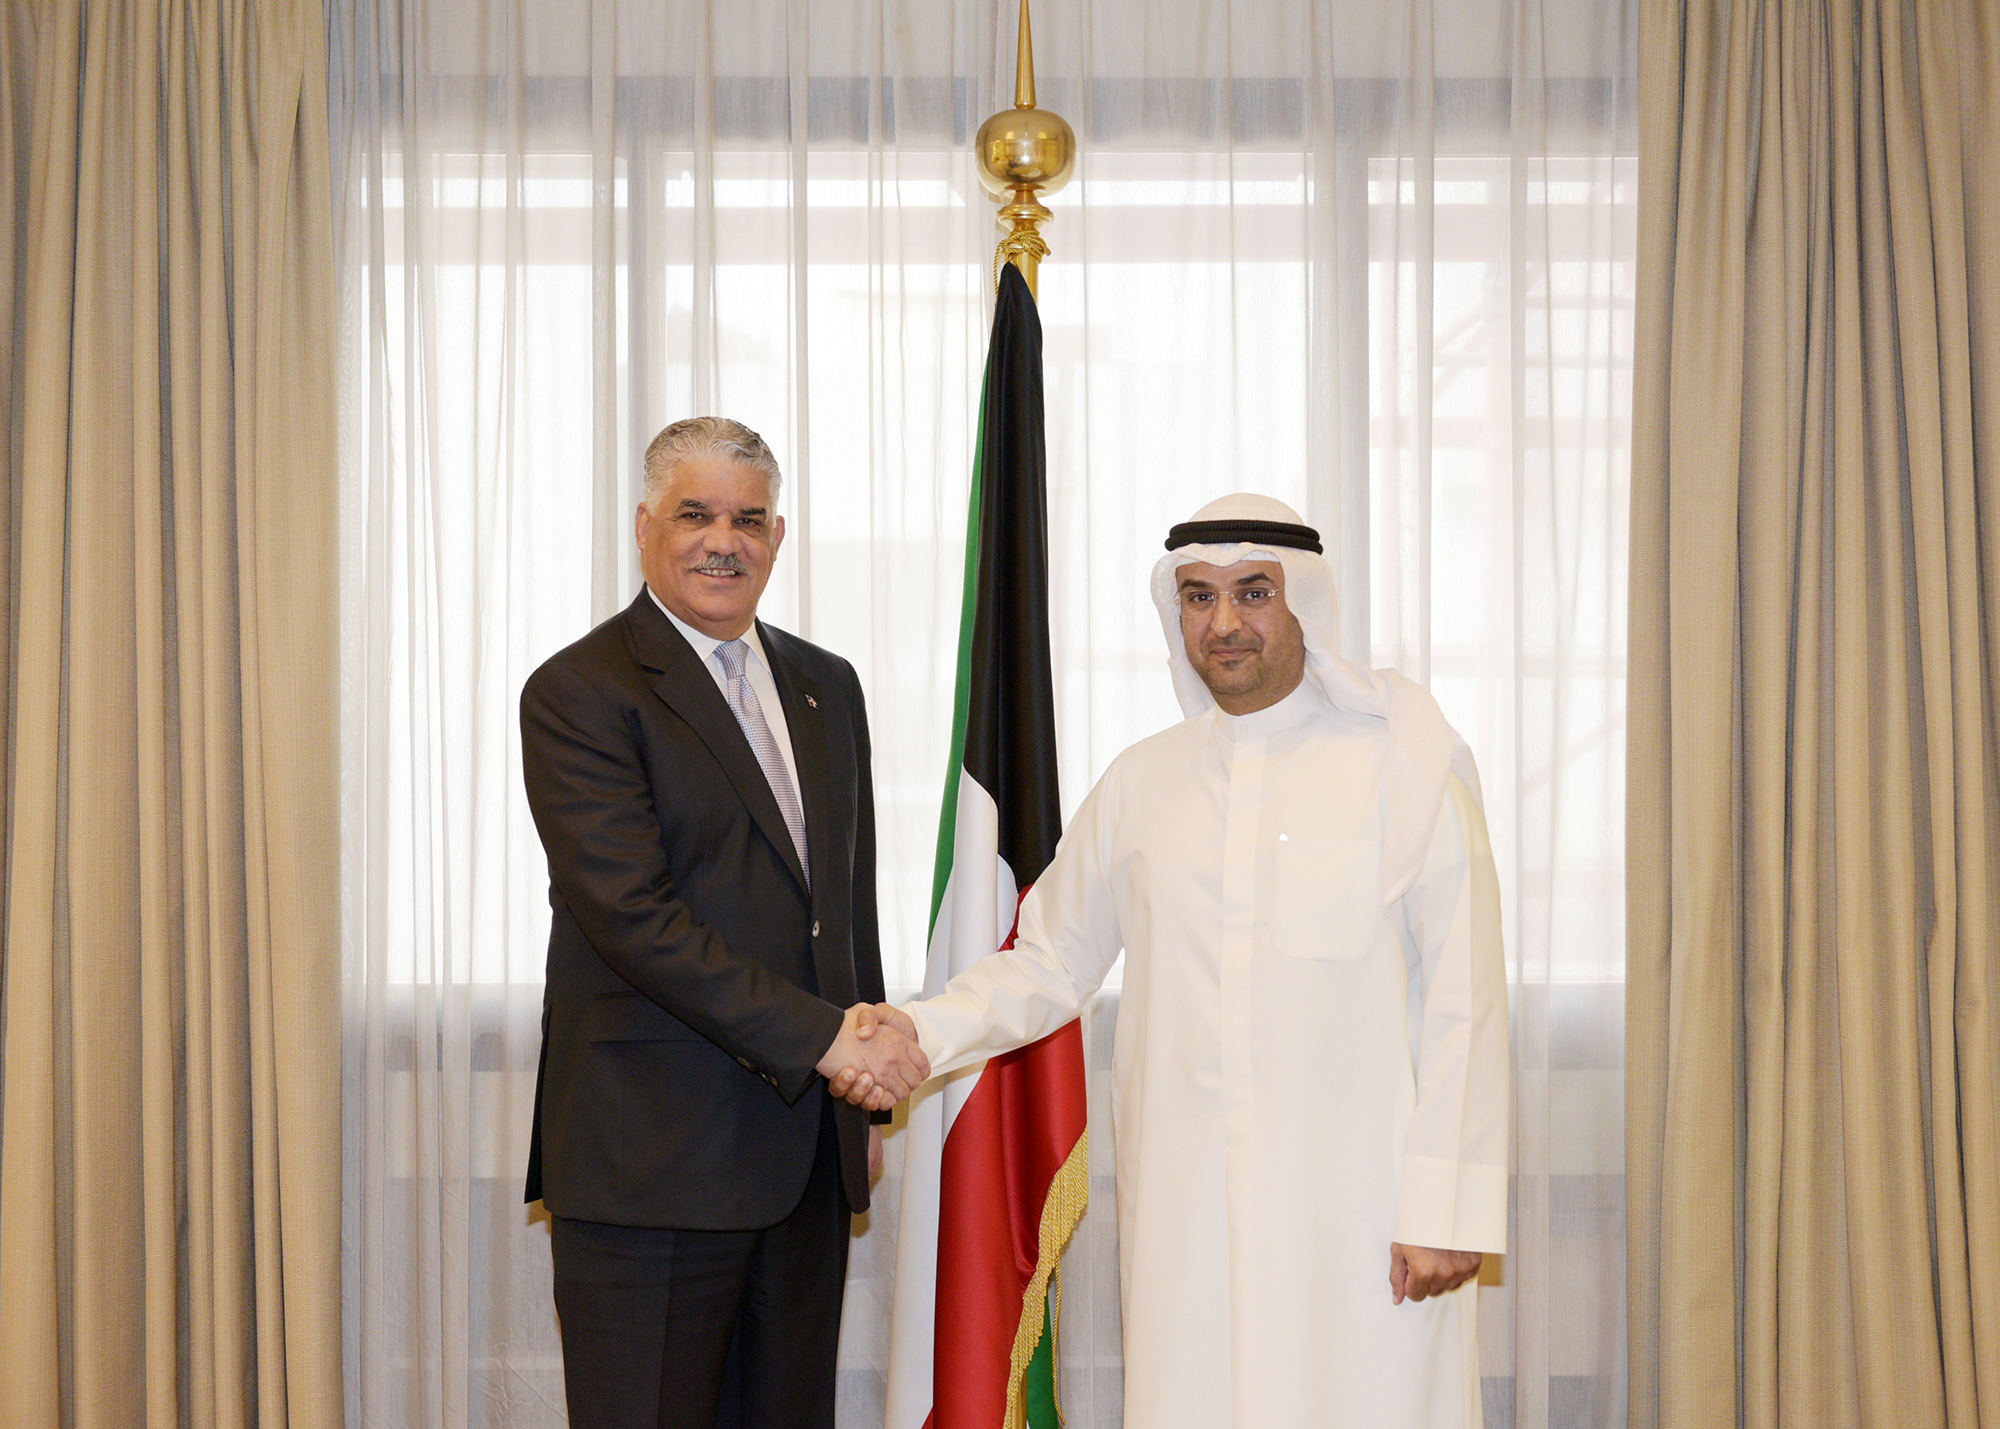 Kuwait's Minister of Finance Nayef Al-Hajraf met with the Minister of Foreign Affairs of the Dominican Republic Miguel Vargas